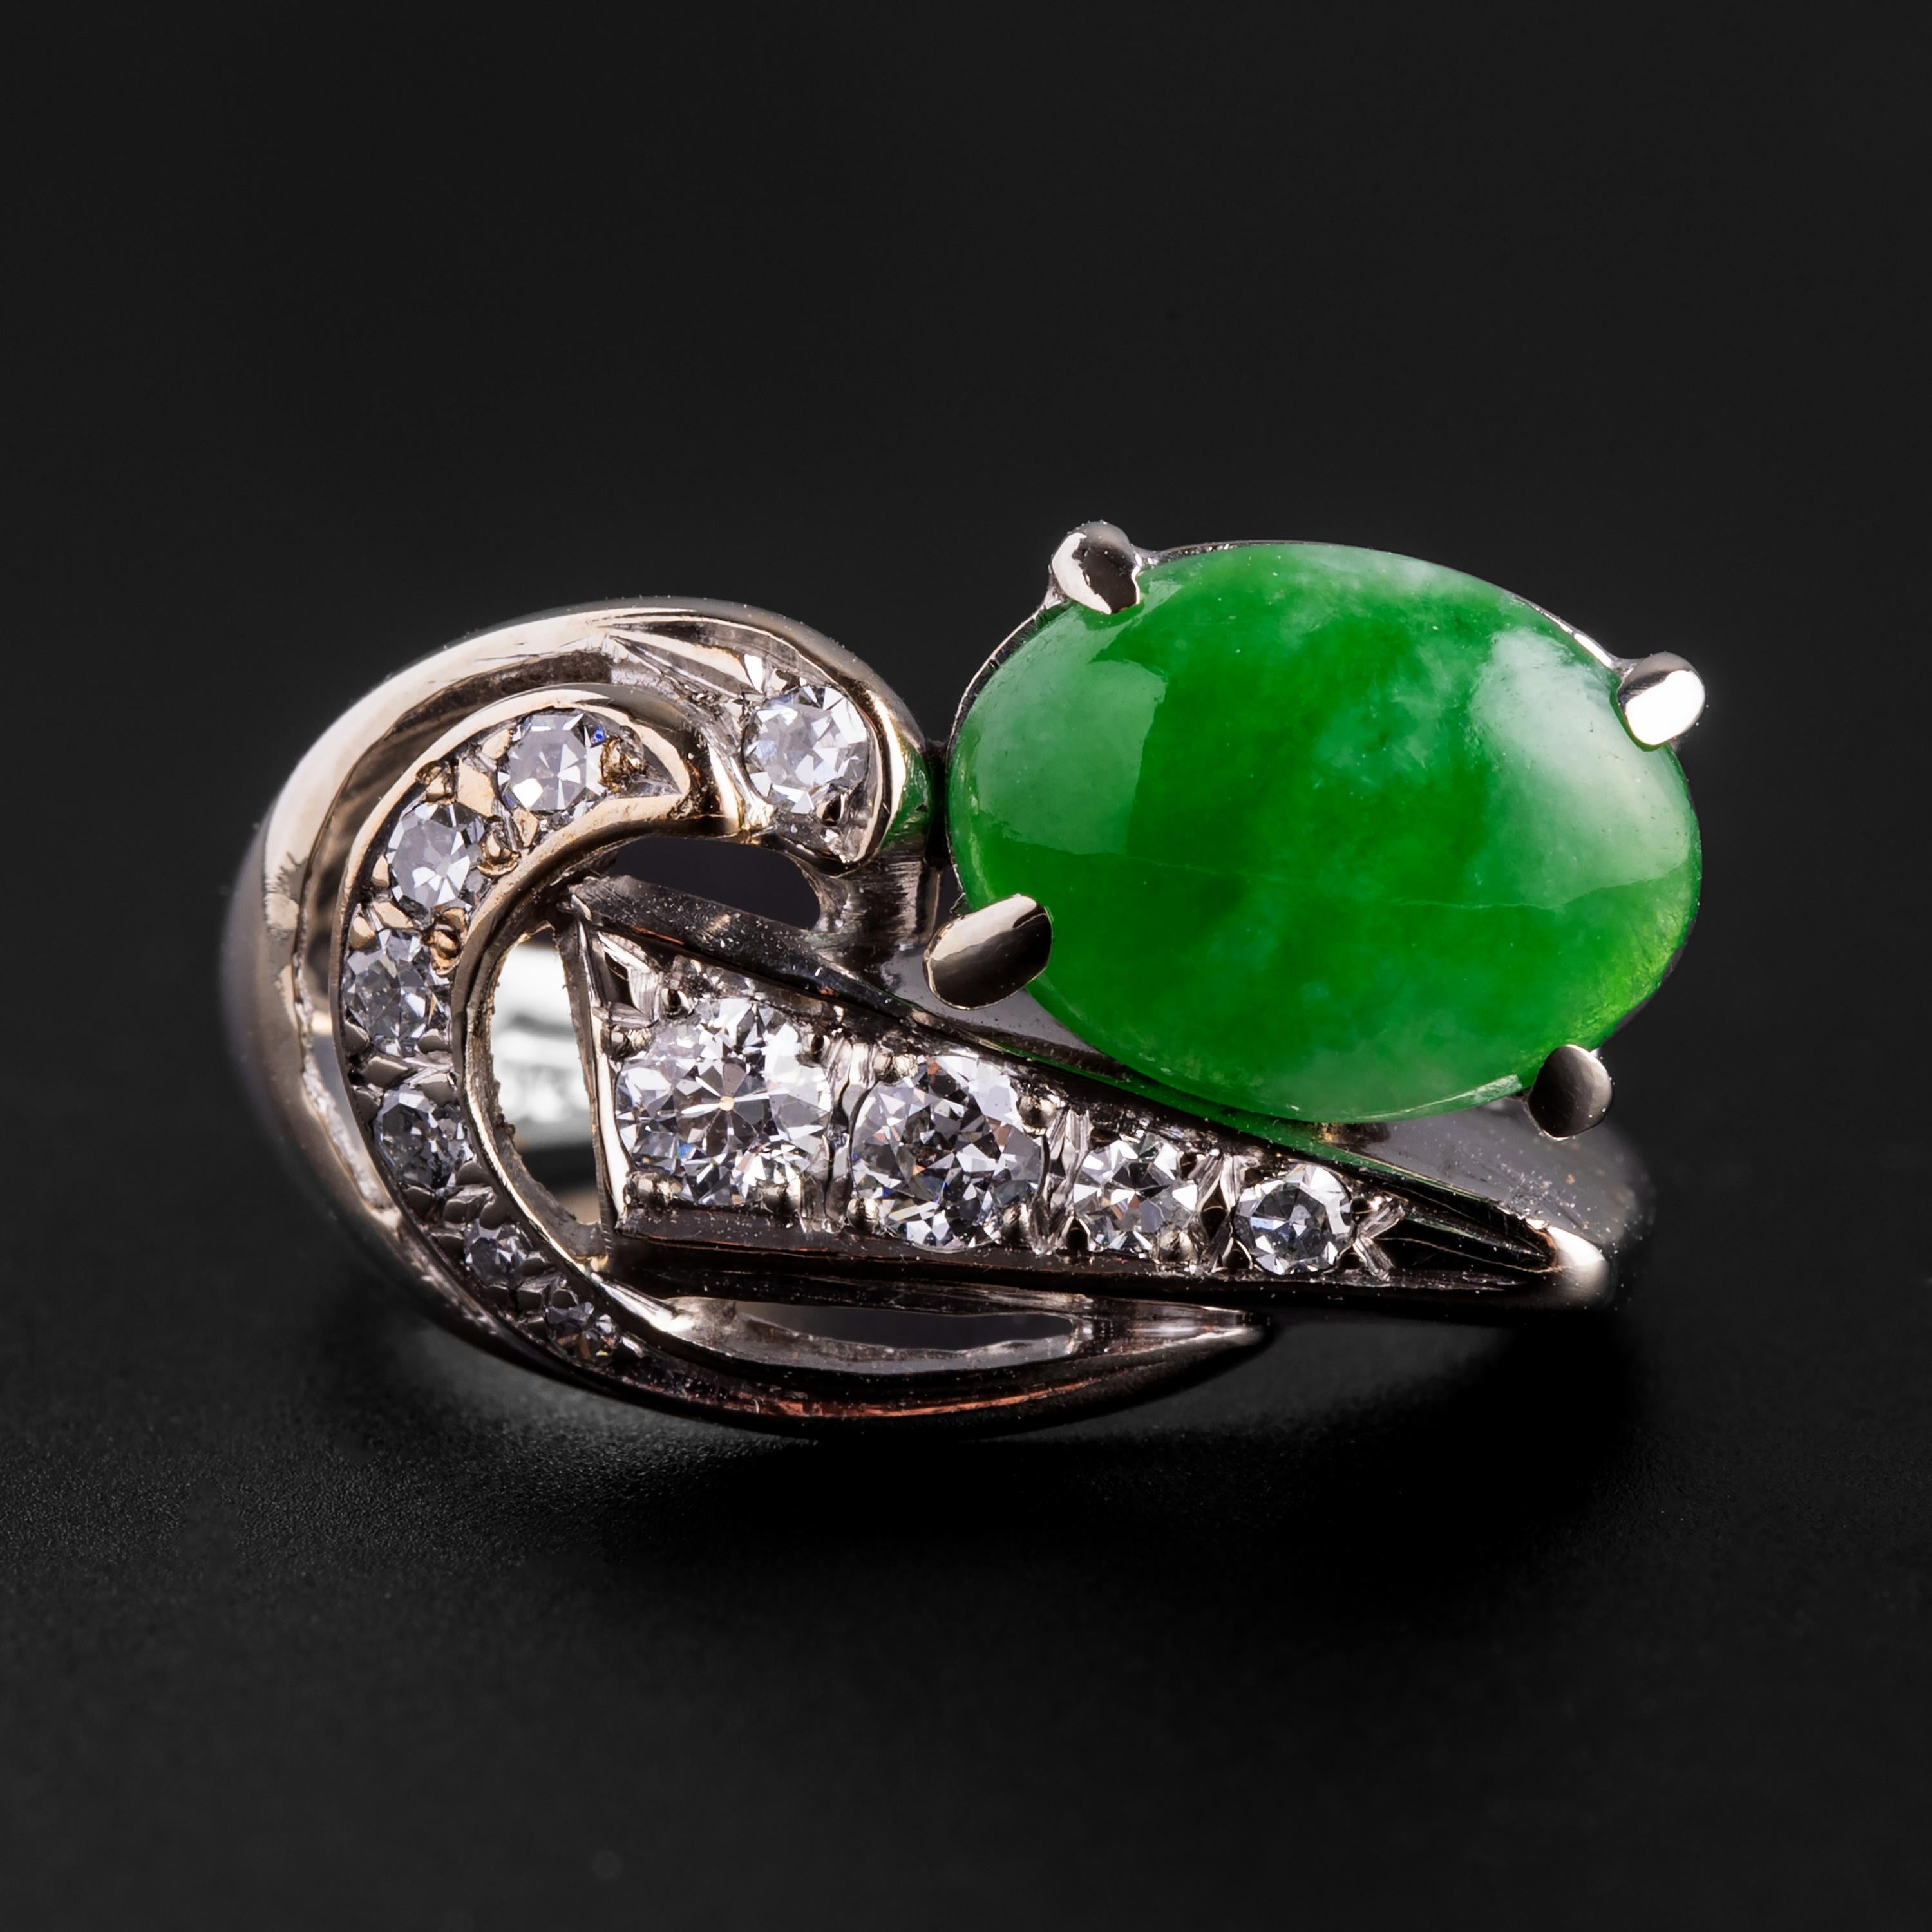 This Retro era certified untreated jadeite jade and diamond ring is whimsical, sculptural, stylish, and fun. Not to mention glamorous. Crafted in 14K white gold, the star of the show is a highly translucent 9.92 mm x 7.5 mm cabochon of a juicy,